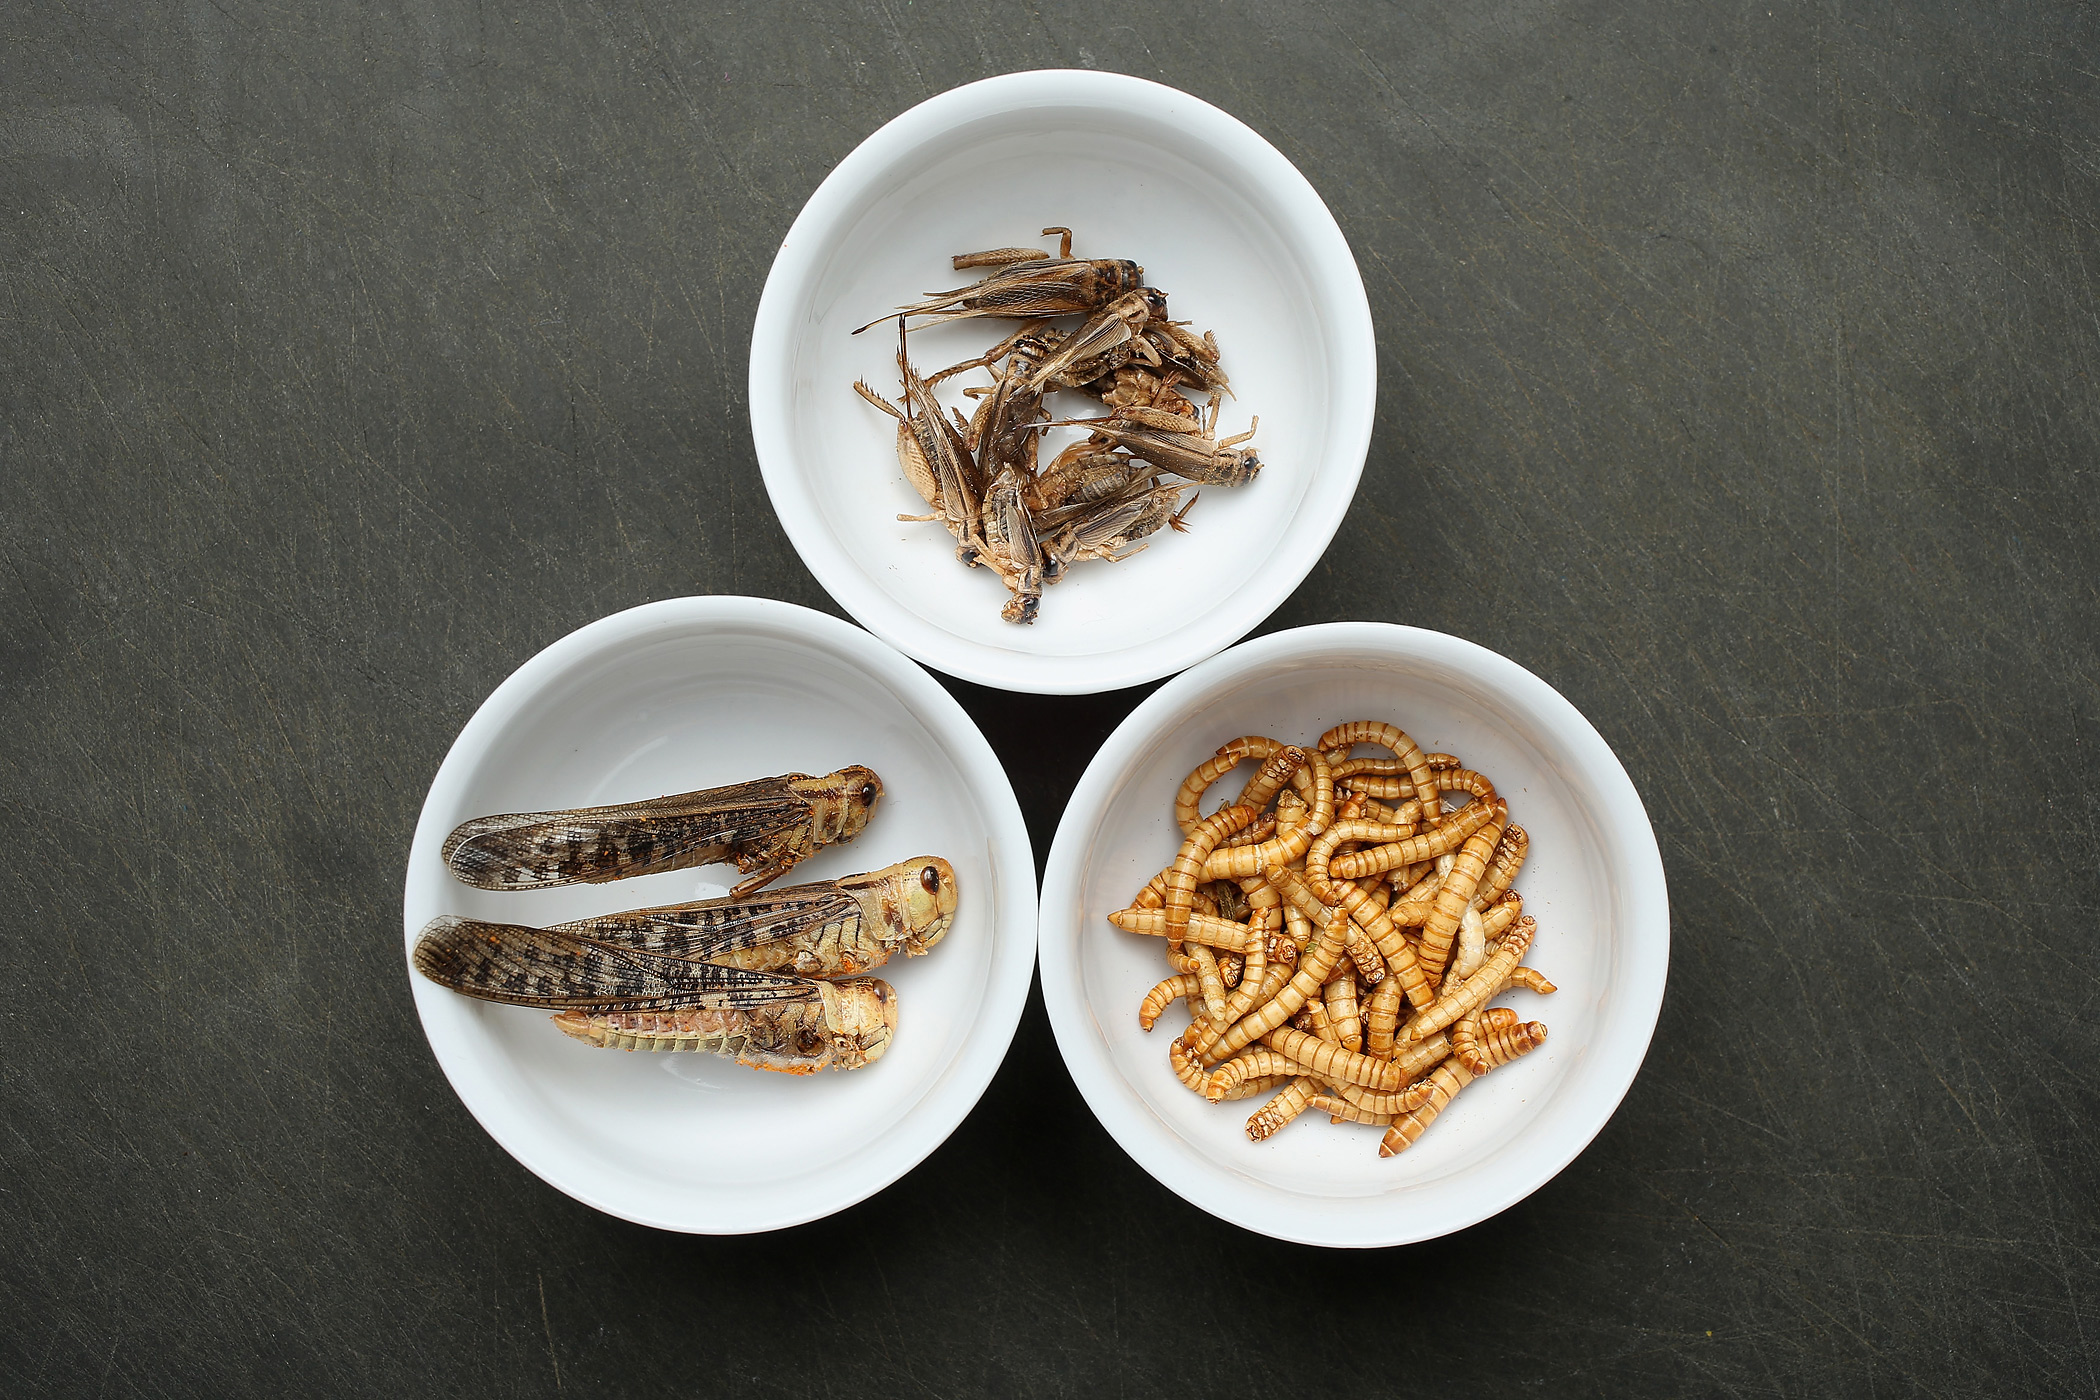 Insects: Our Food Of The Future?